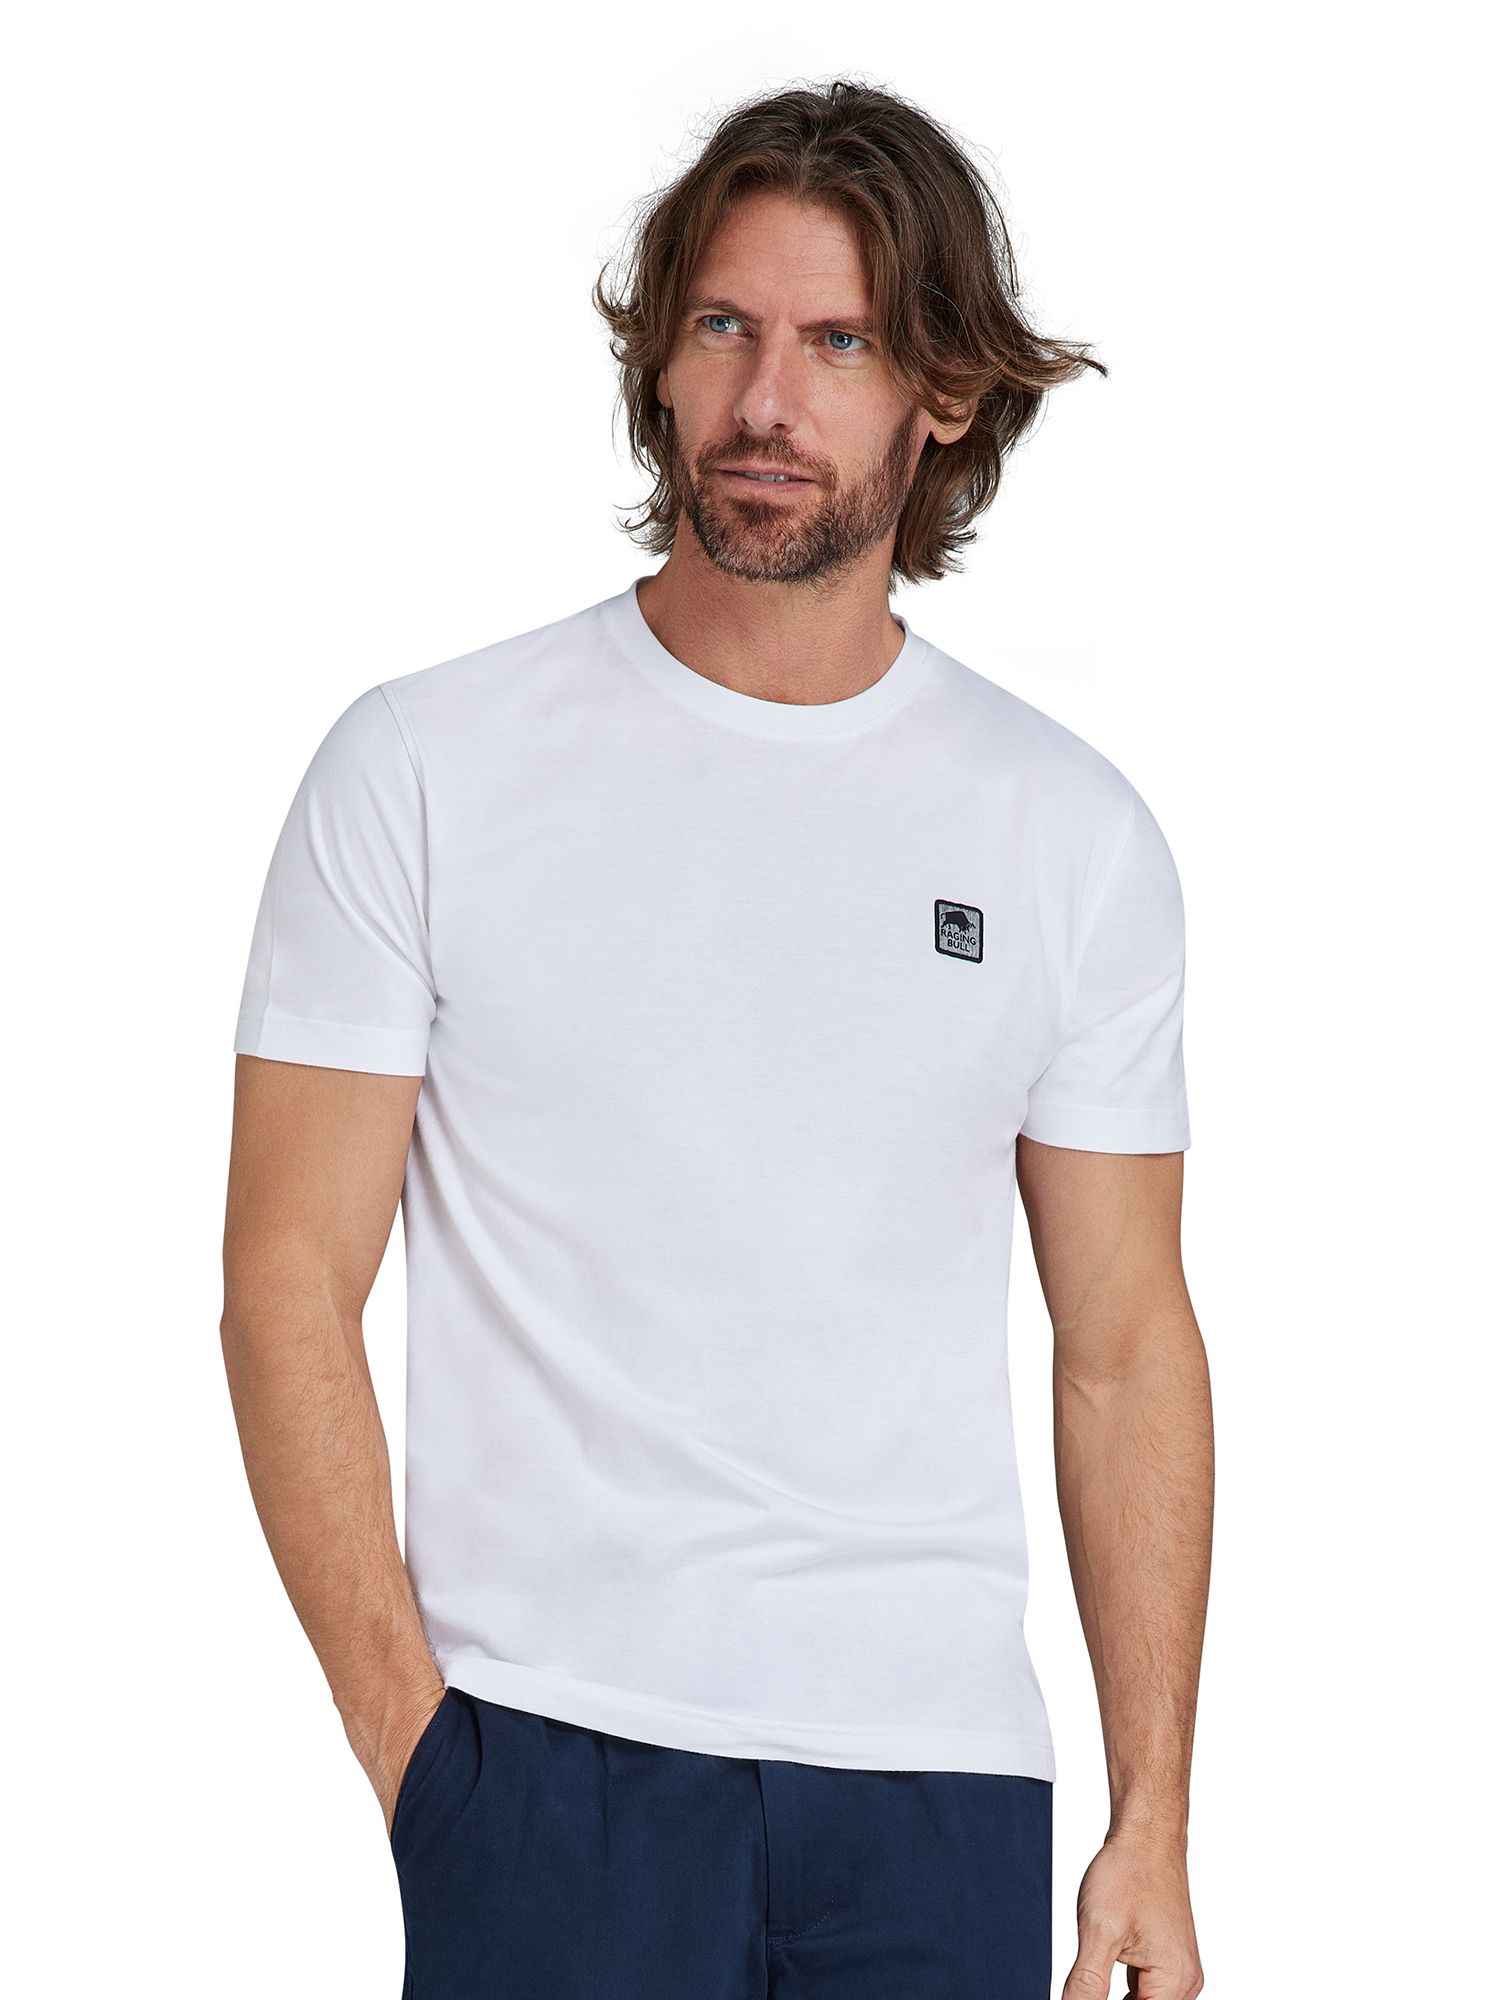 Raging Bull Classic Woven Patch T-Shirt, White, L